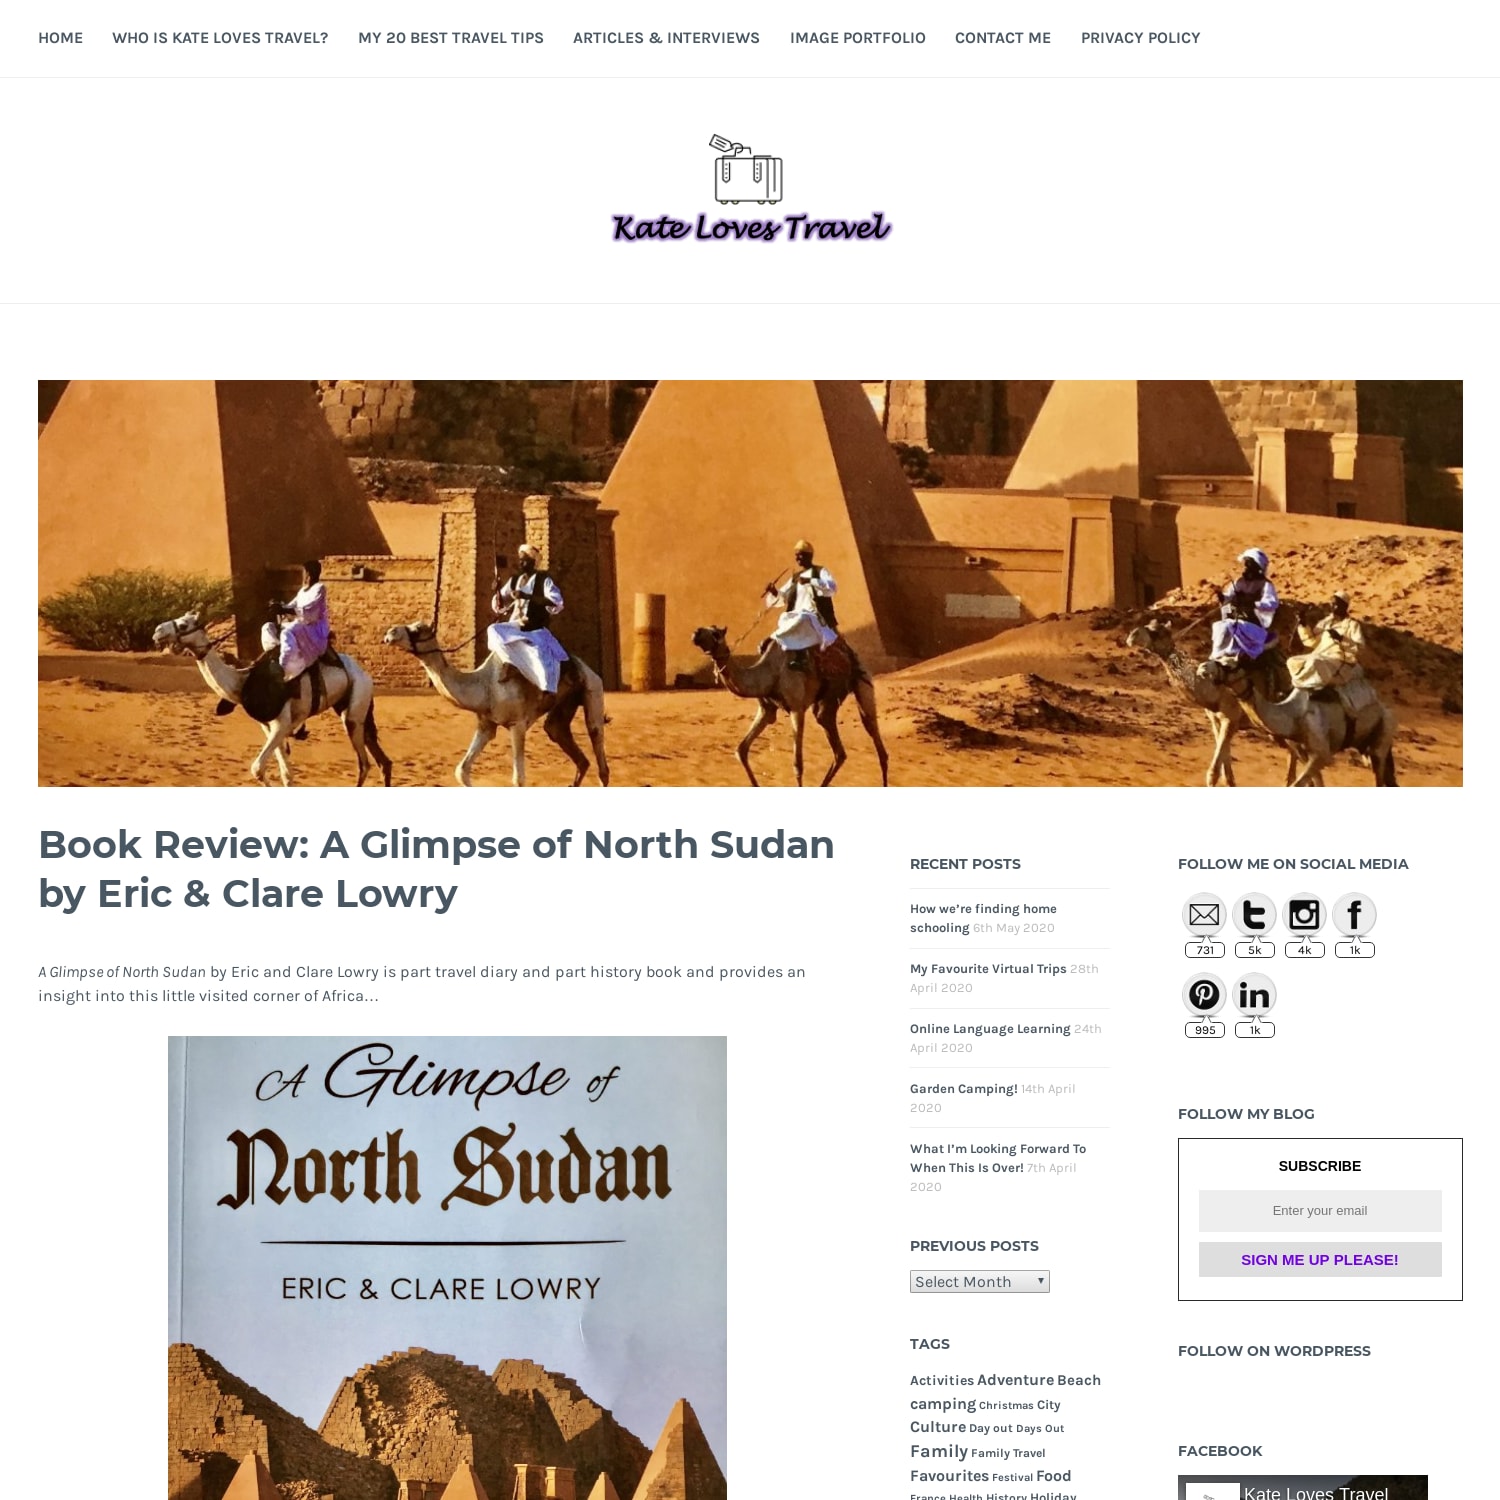 Book Review: A Glimpse of North Sudan by Eric & Clare Lowry